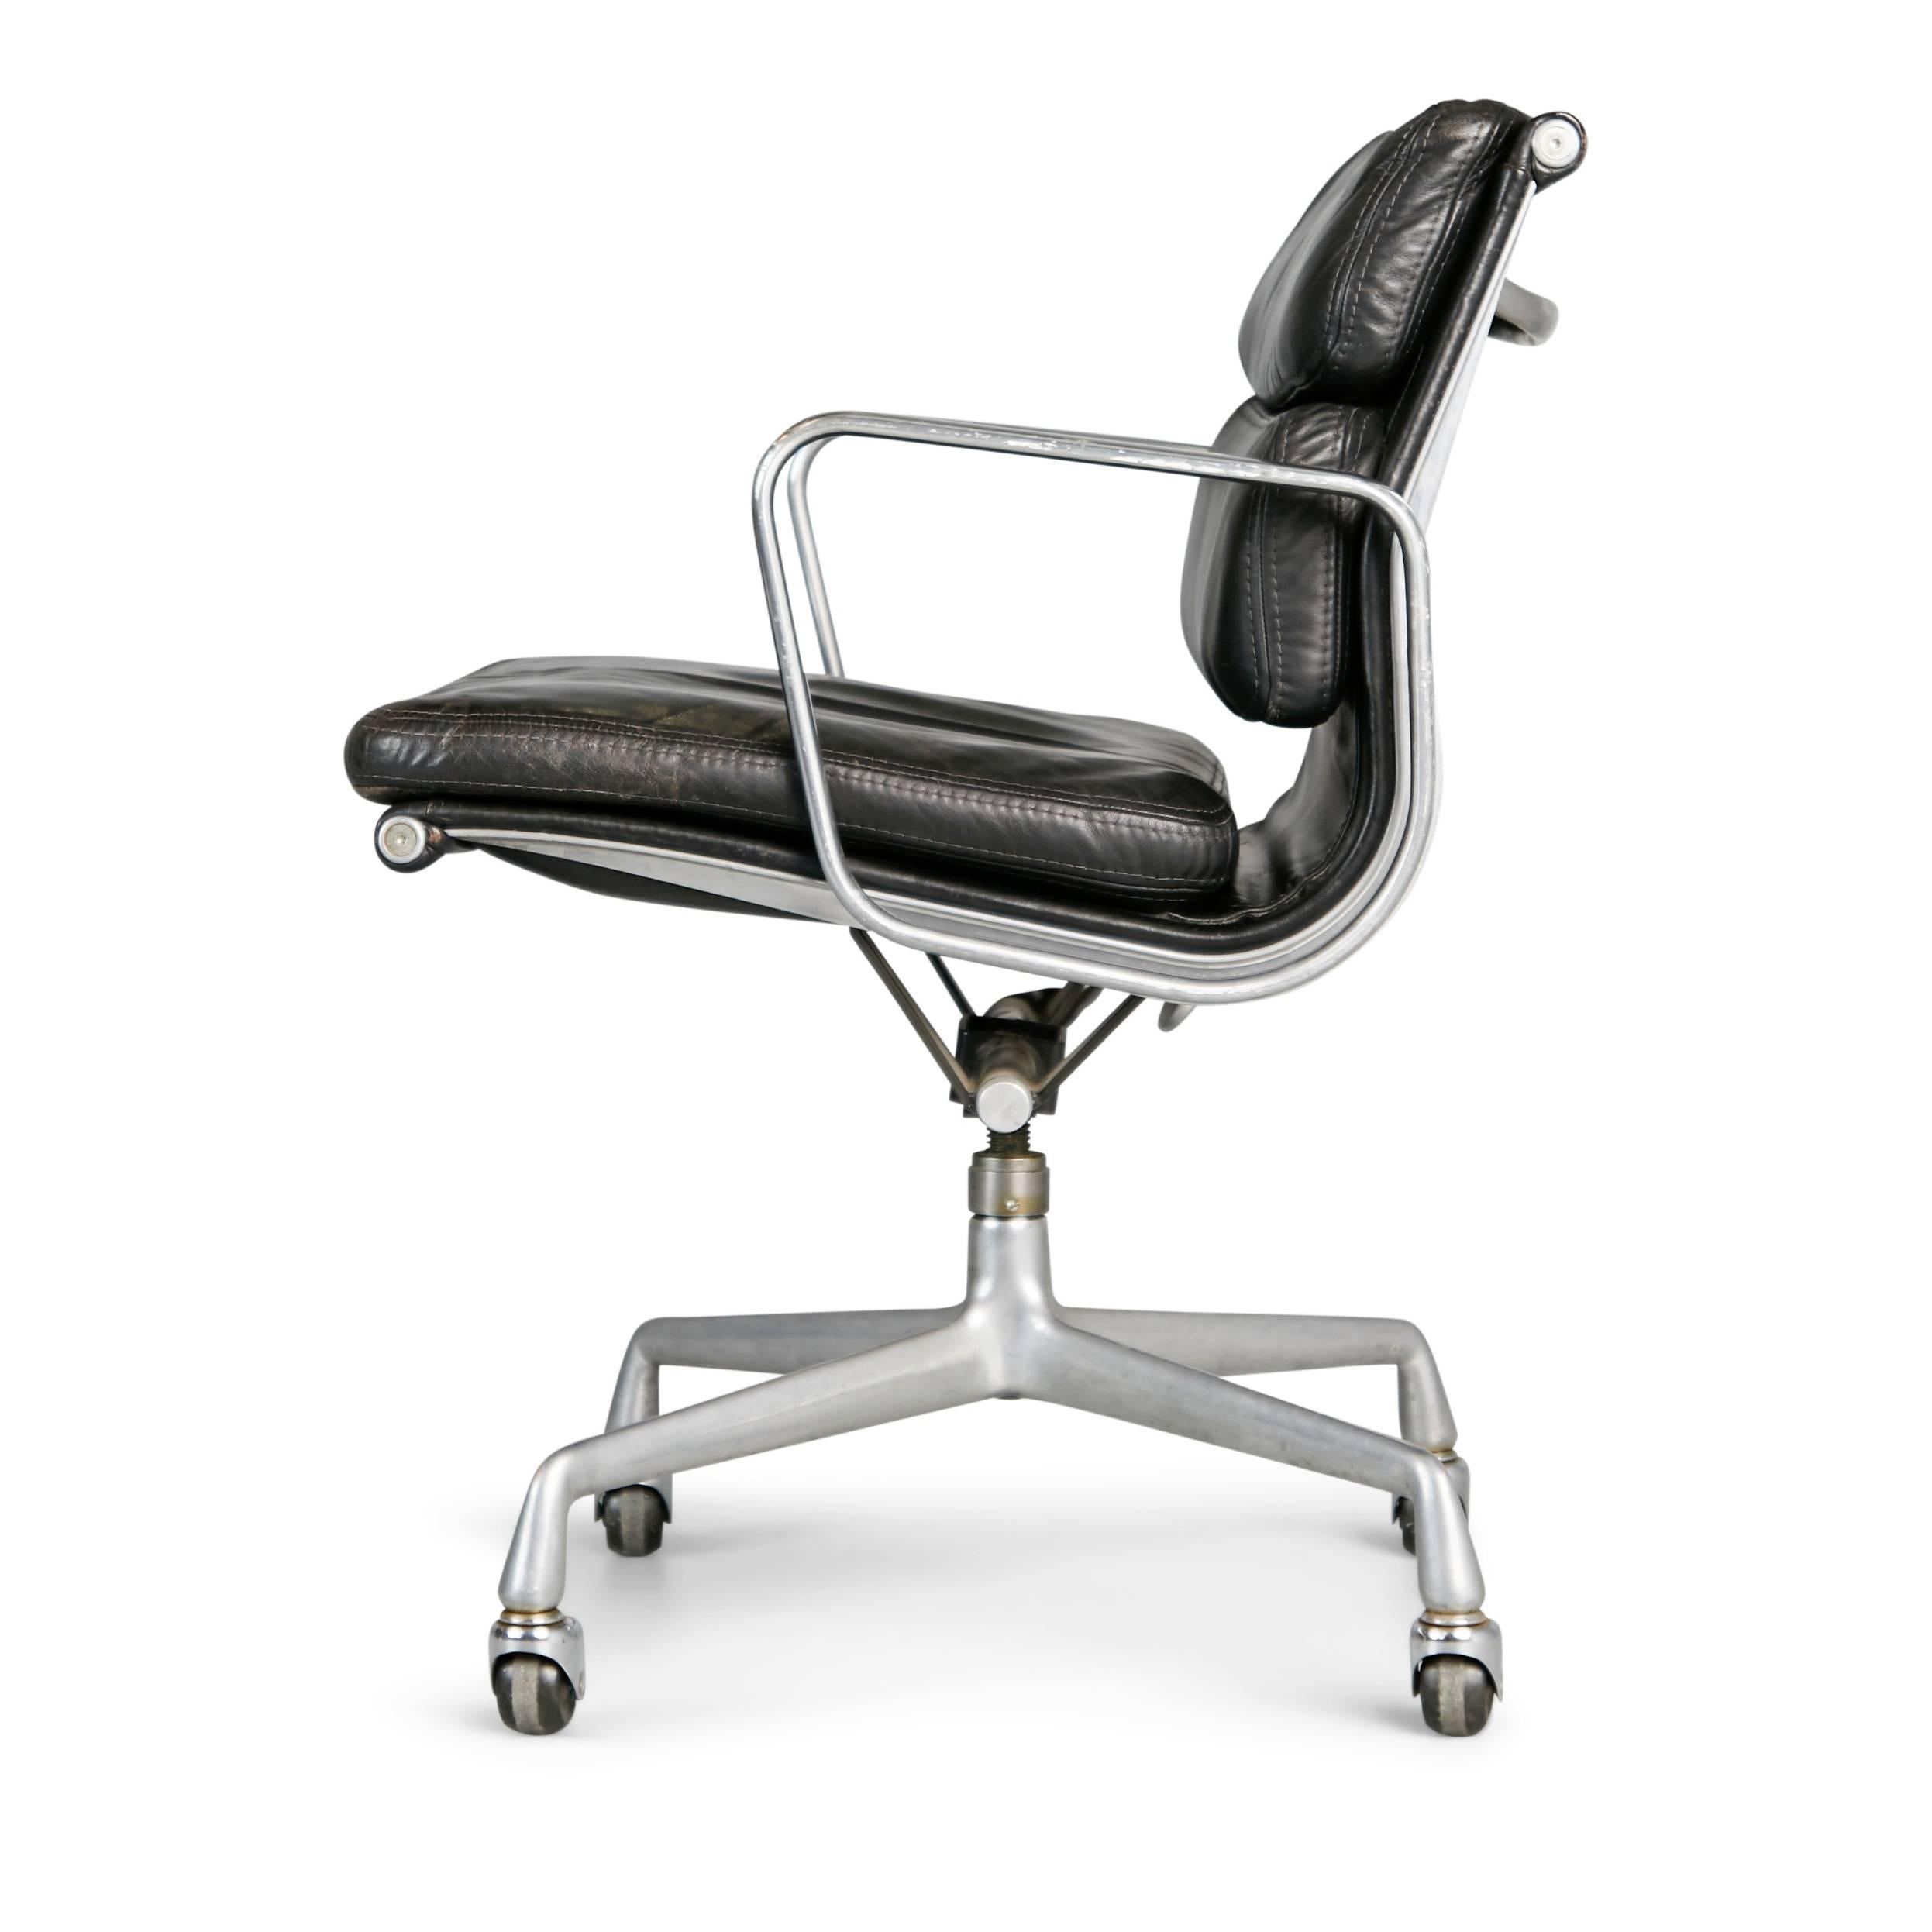 American Charles Eames for Herman Miller Black Soft Pad Management Chairs, circa 1980